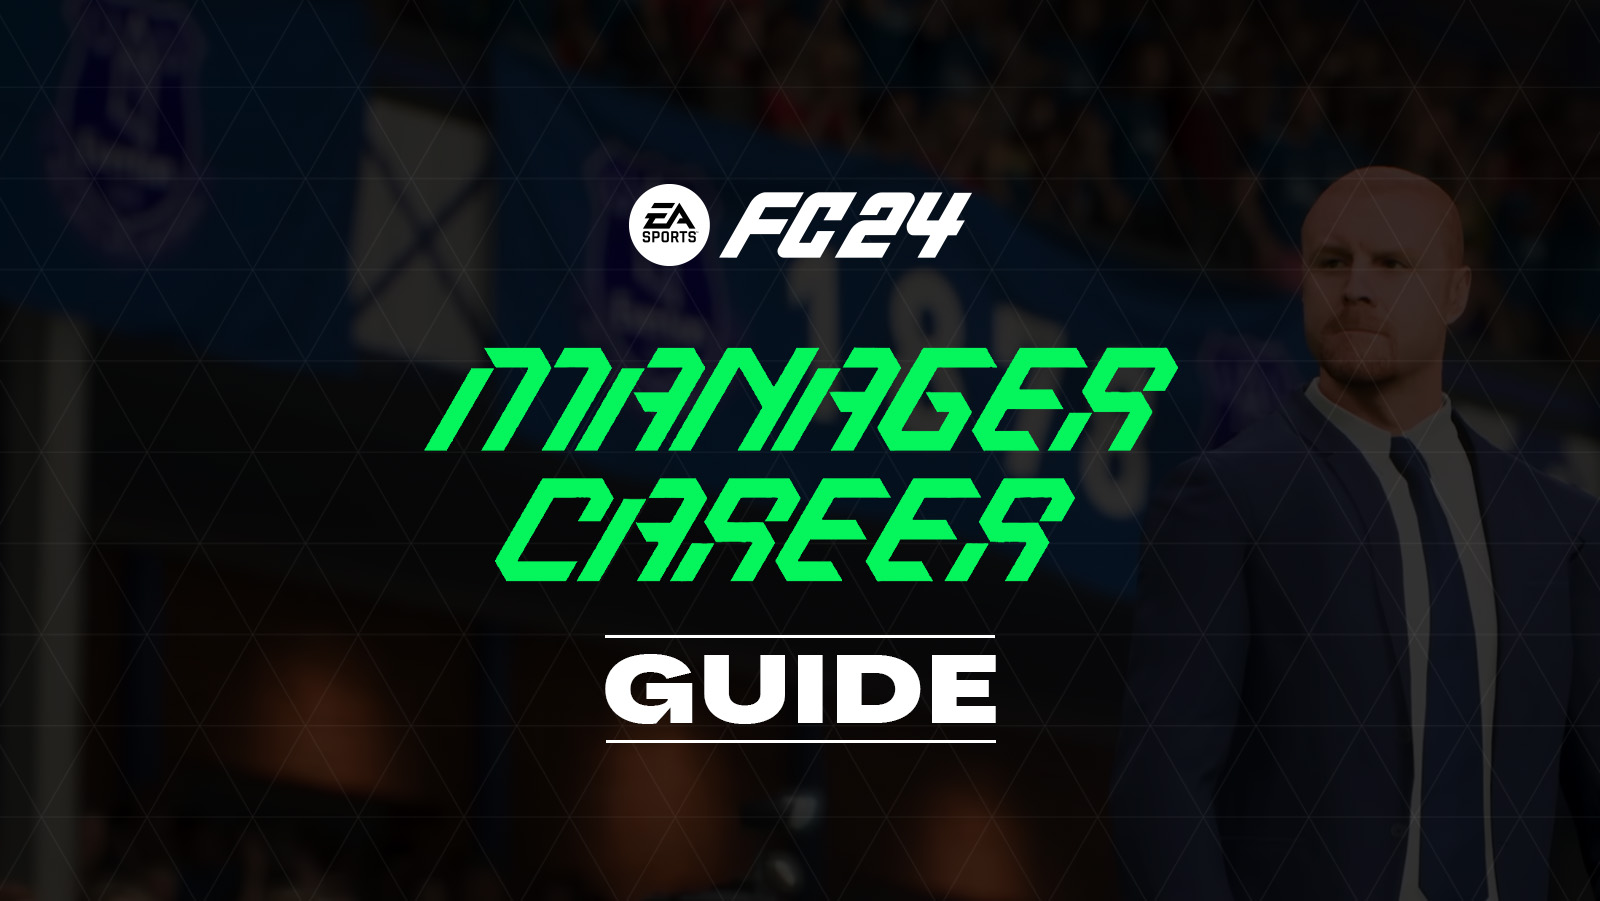 FC 24 Manager Career Guide